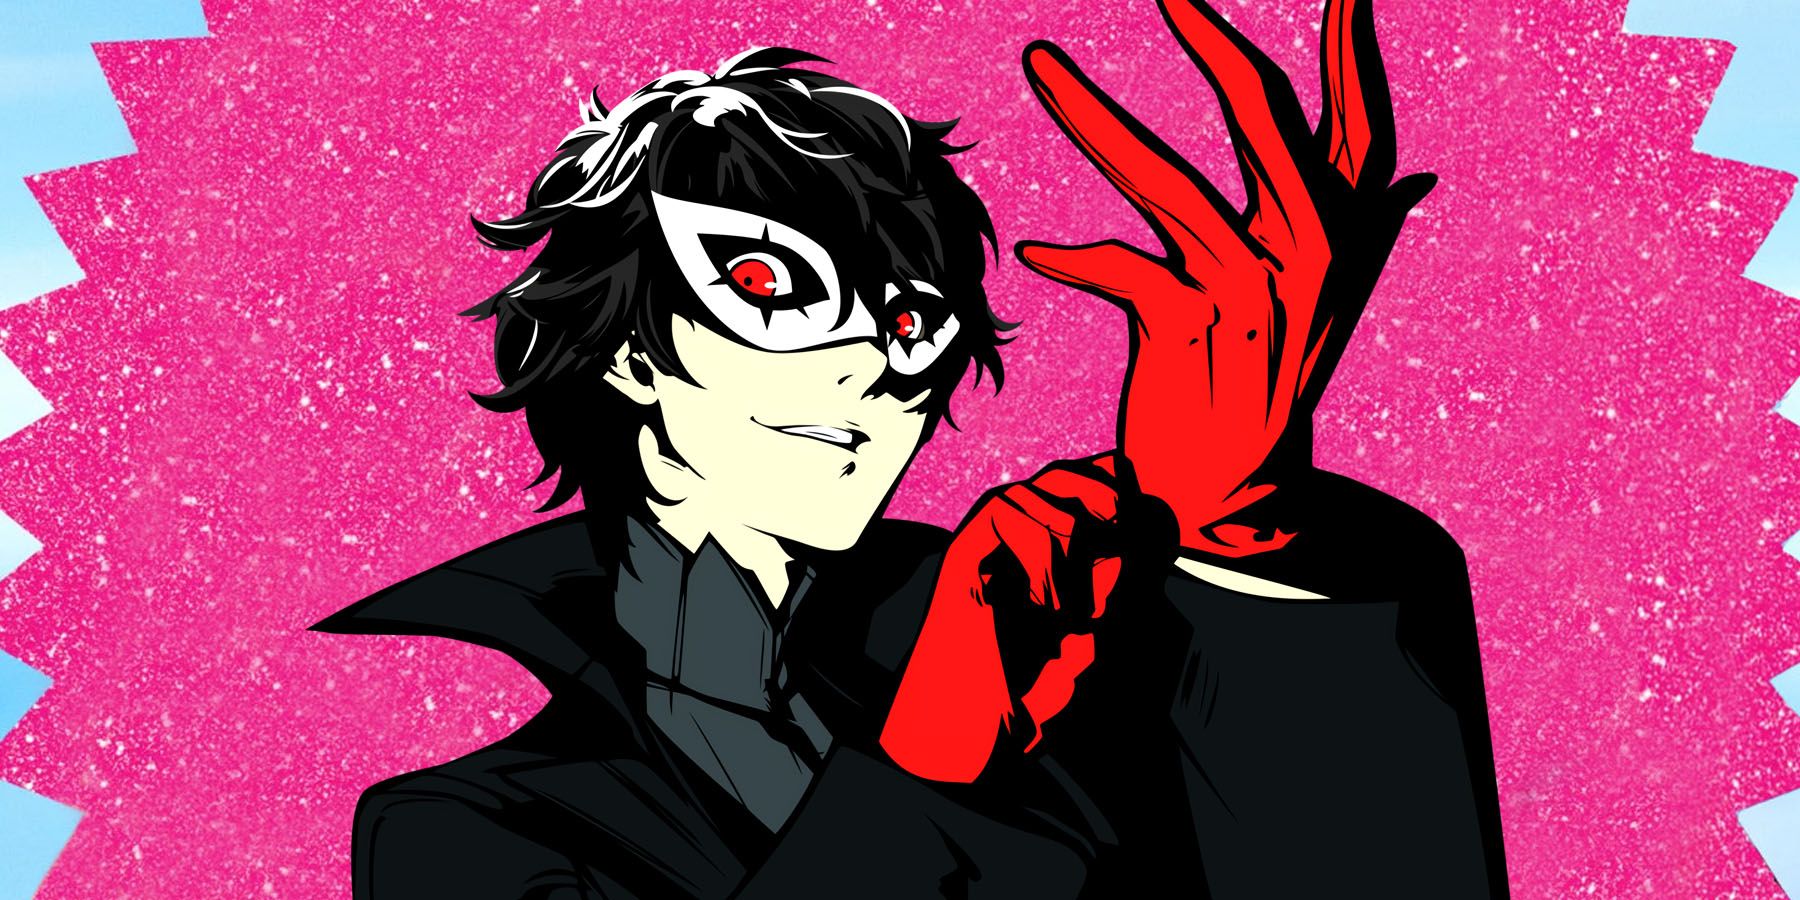 An image of Joker from Persona 5 placed in the poster for the Barbie movie.